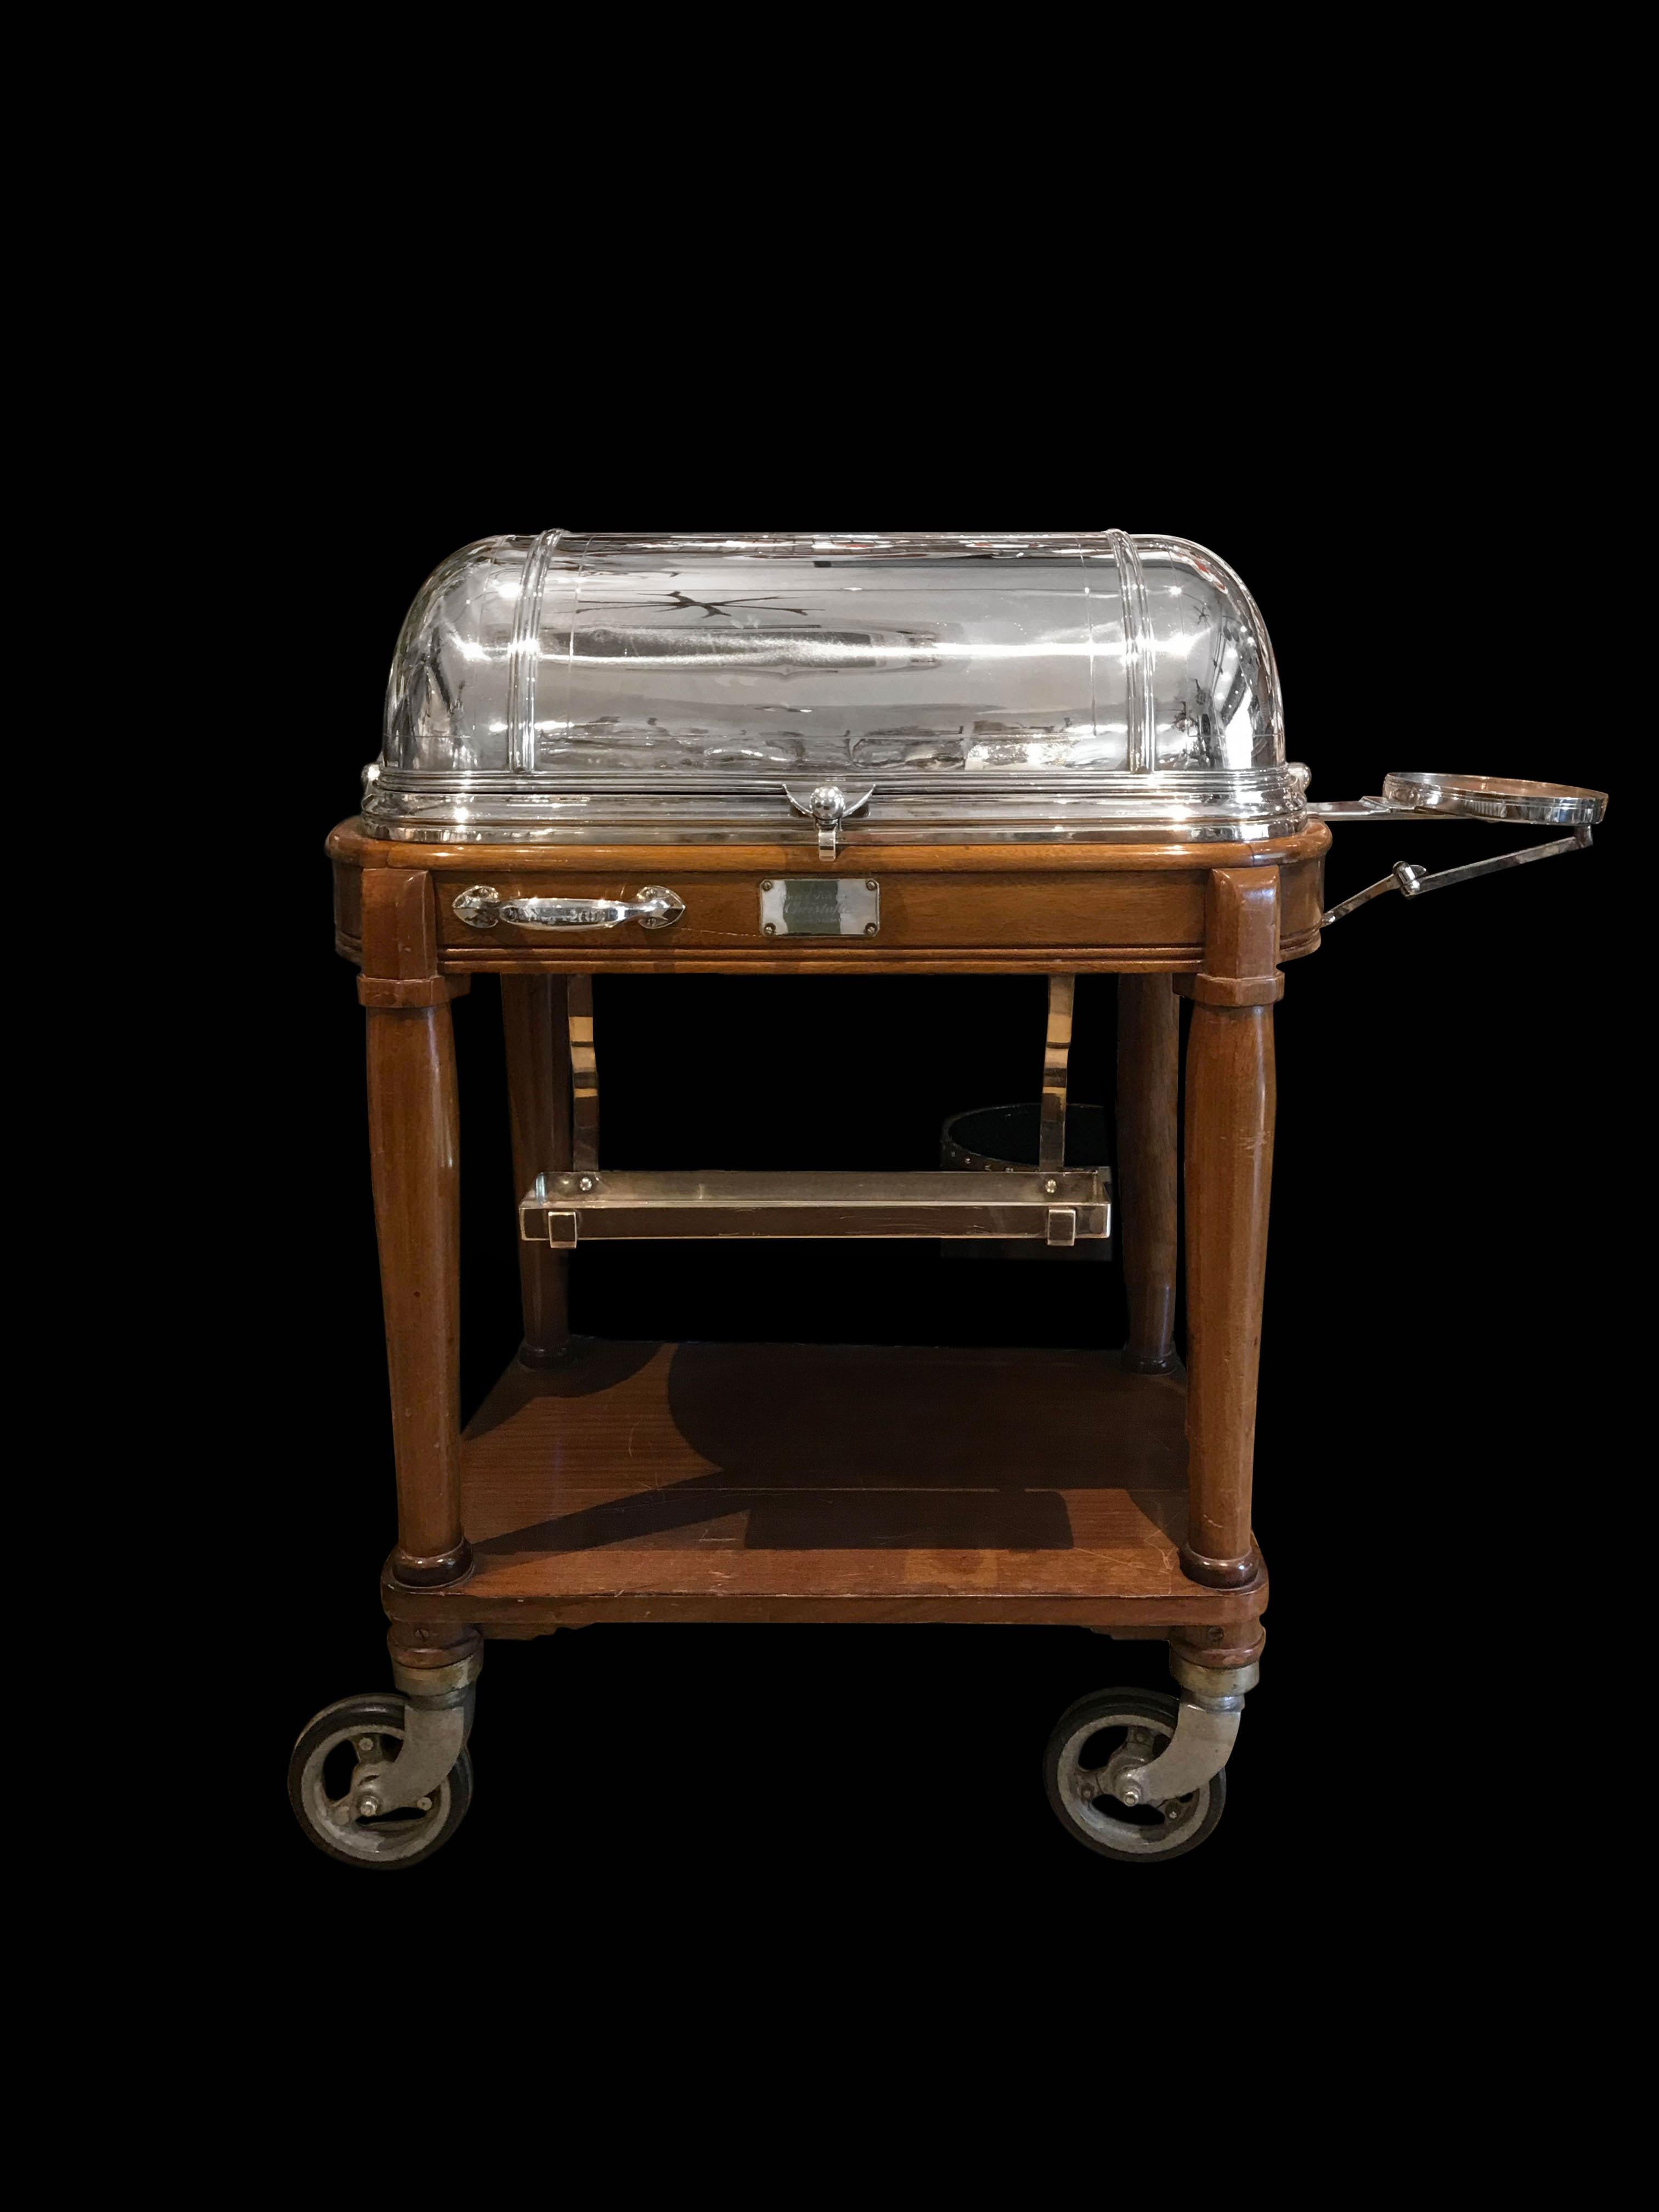 This French carving trolley crafted by the French world-famous silversmith Christofle.
The trolley is very practical to keep meals warm. Made of silver plated and stained wood, the trolley is oval-shaped and standing on four wheels which makes it